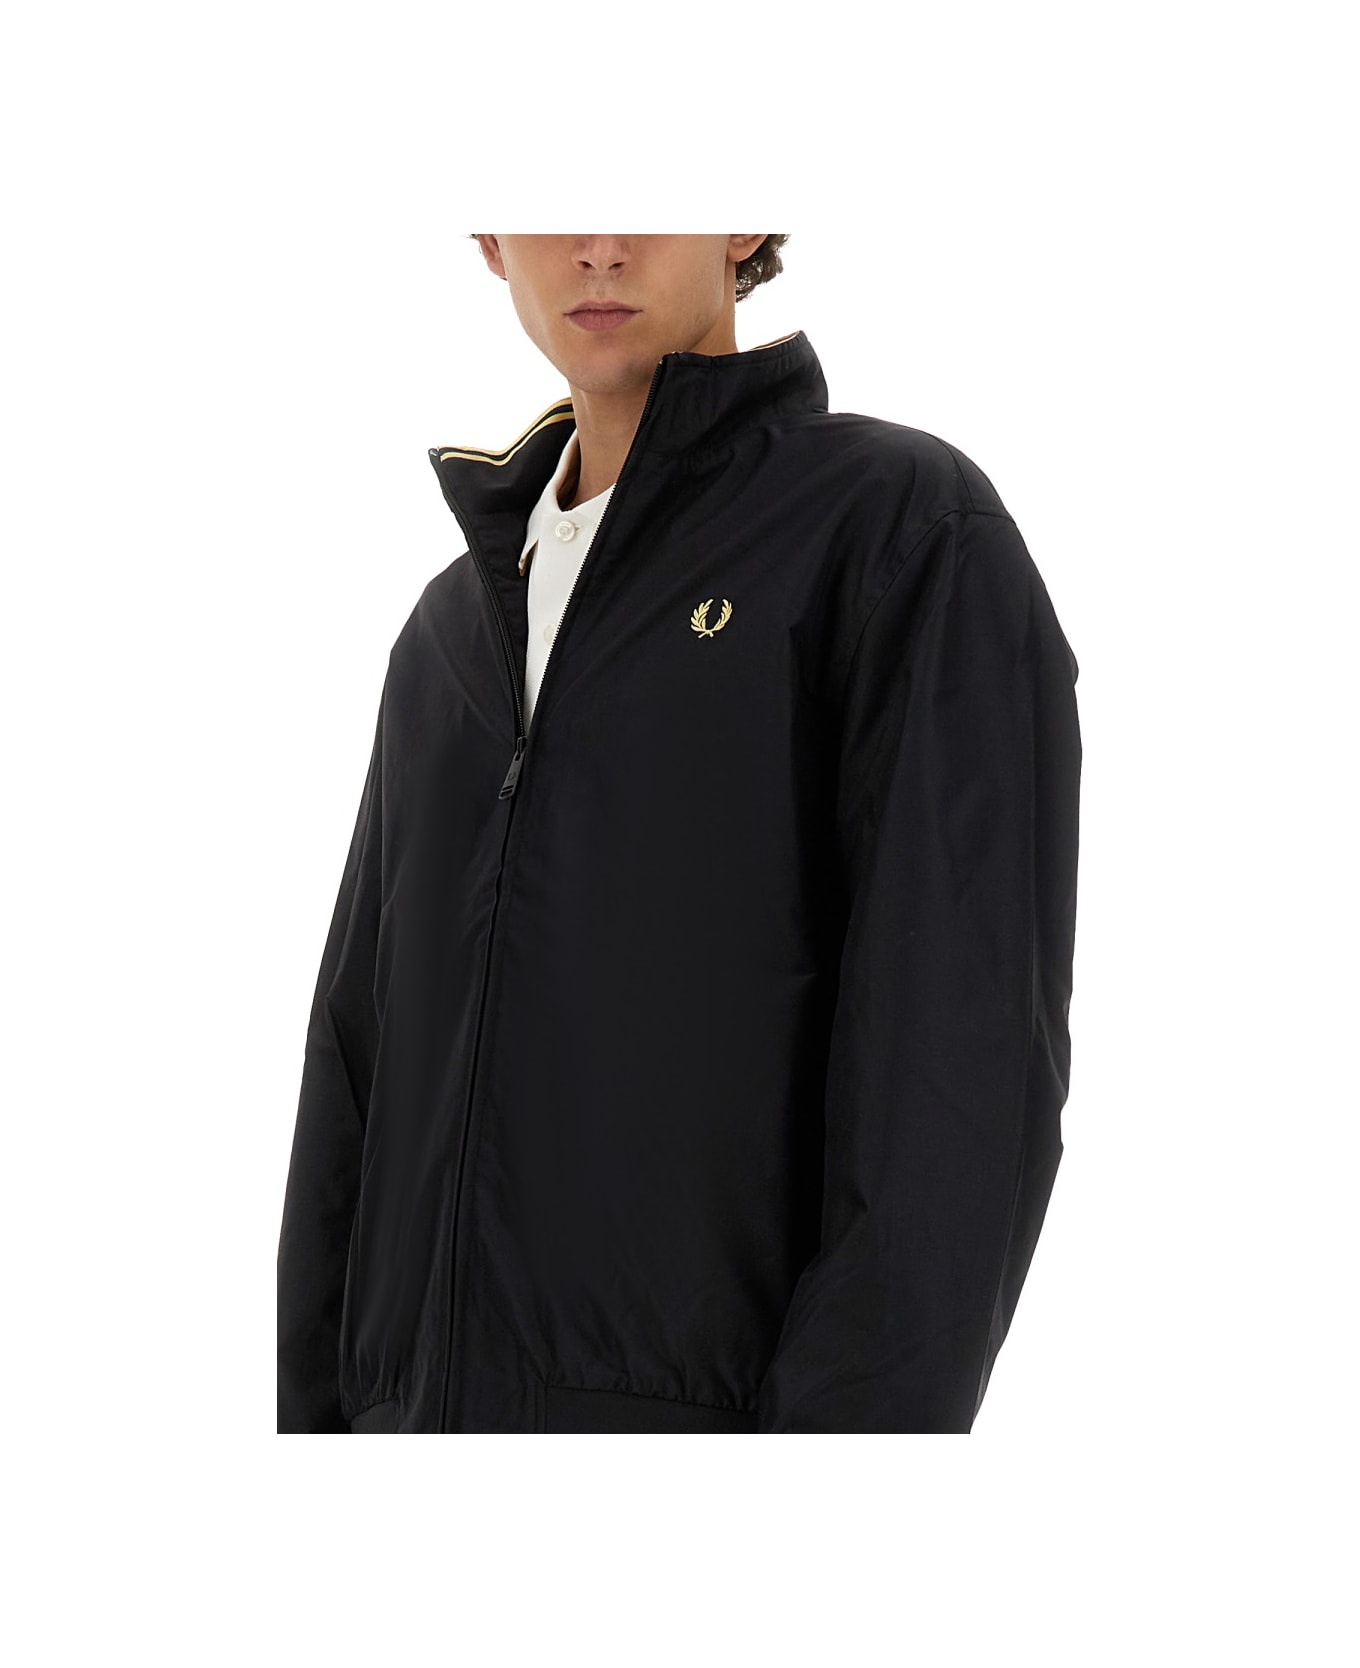 Fred Perry "brentham" Jacket - BLACK